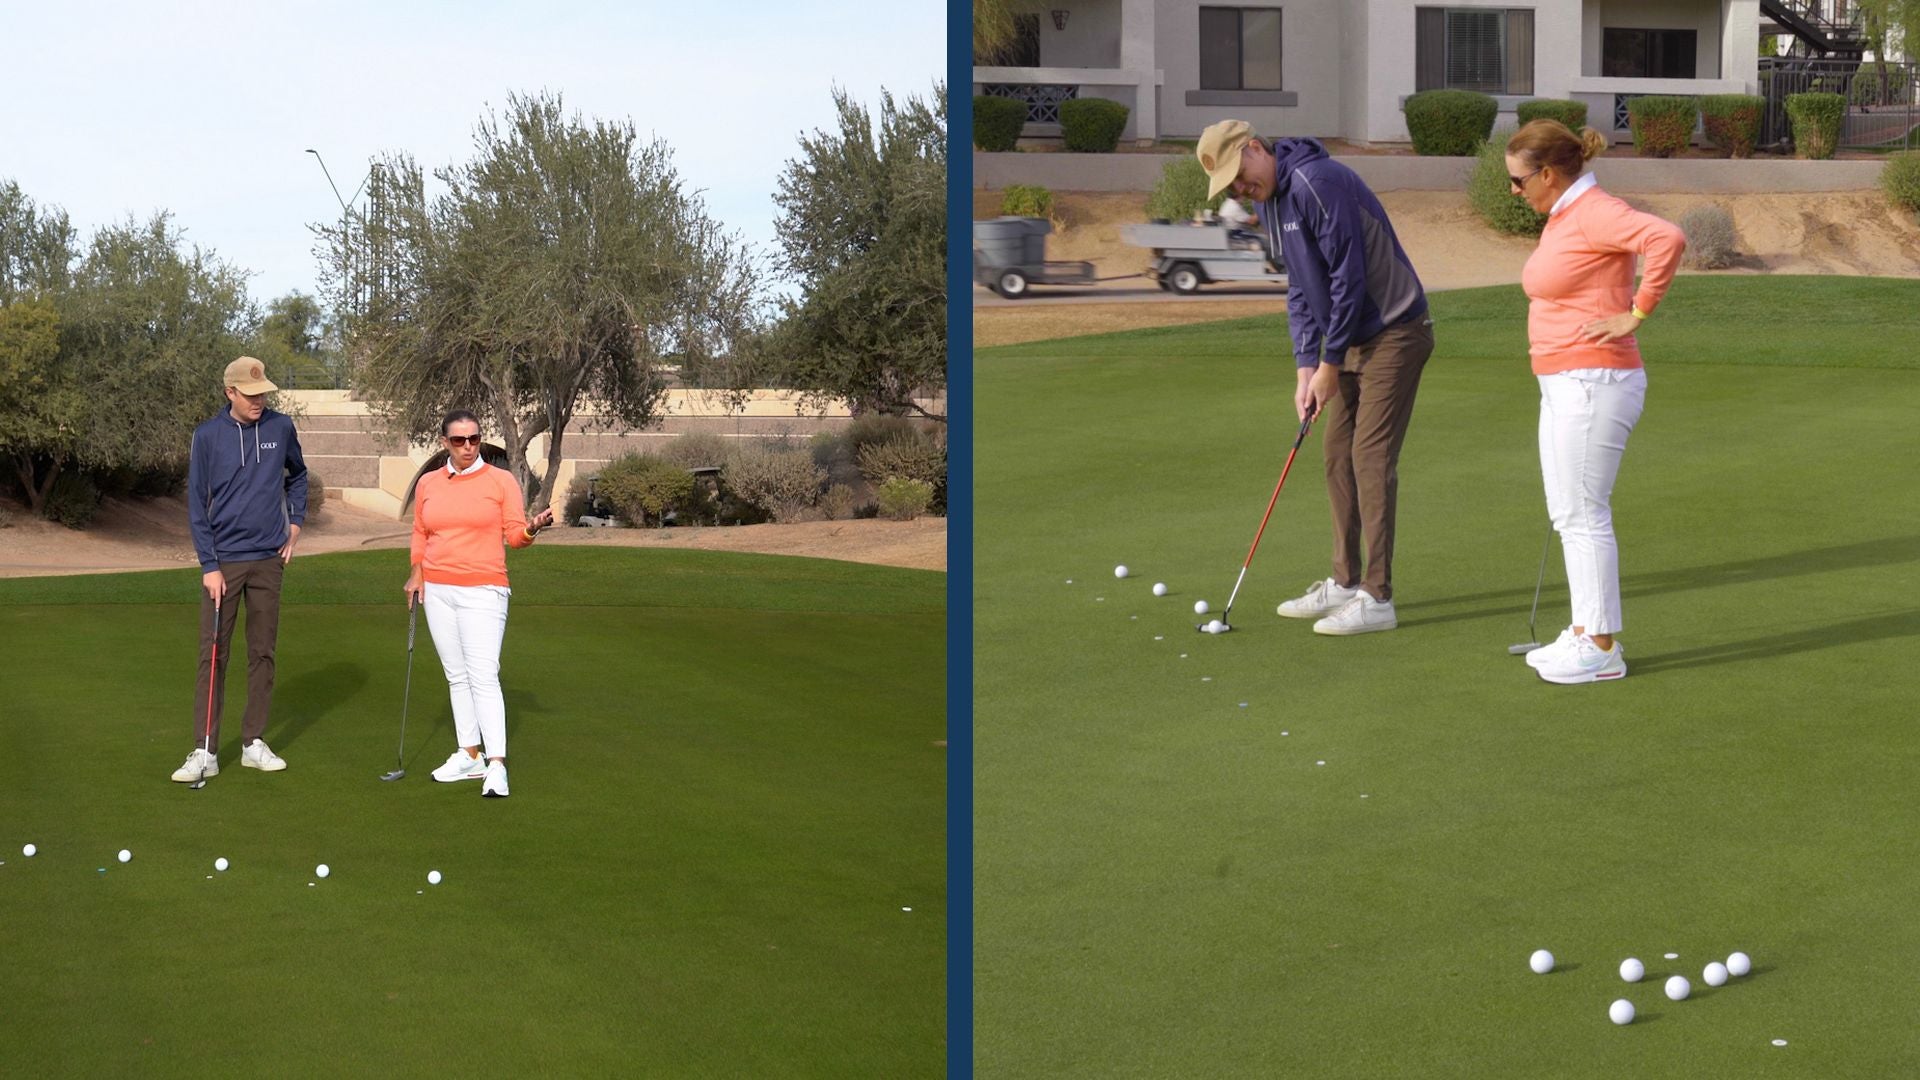 Do this warm-up drill to dial in your speed on the greens